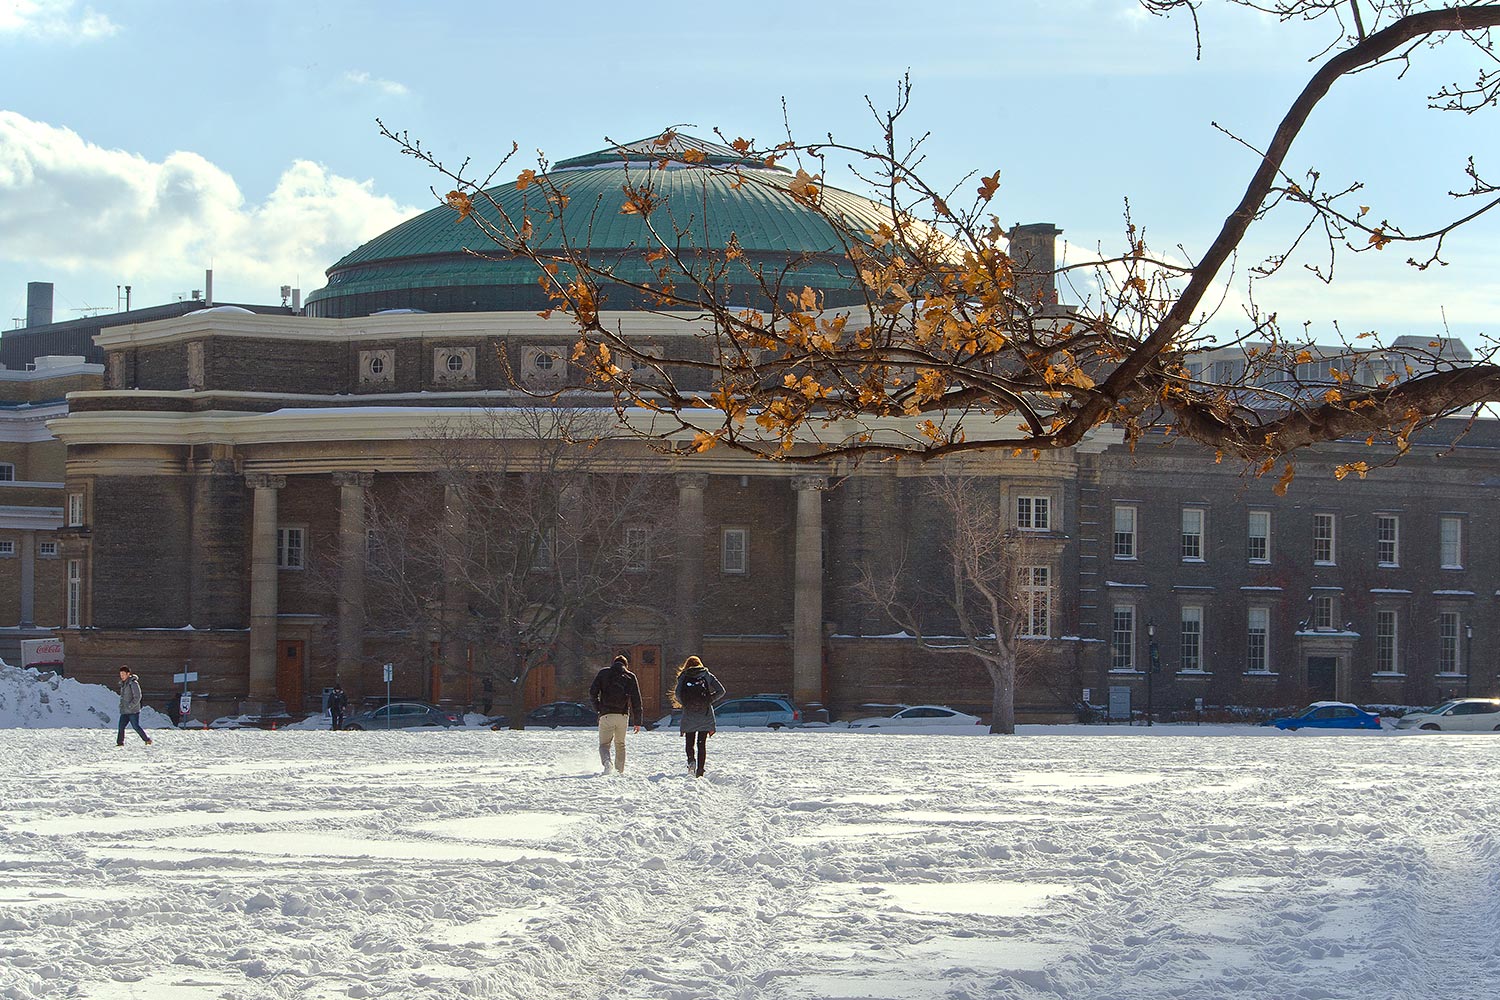 Convocation hall in snow